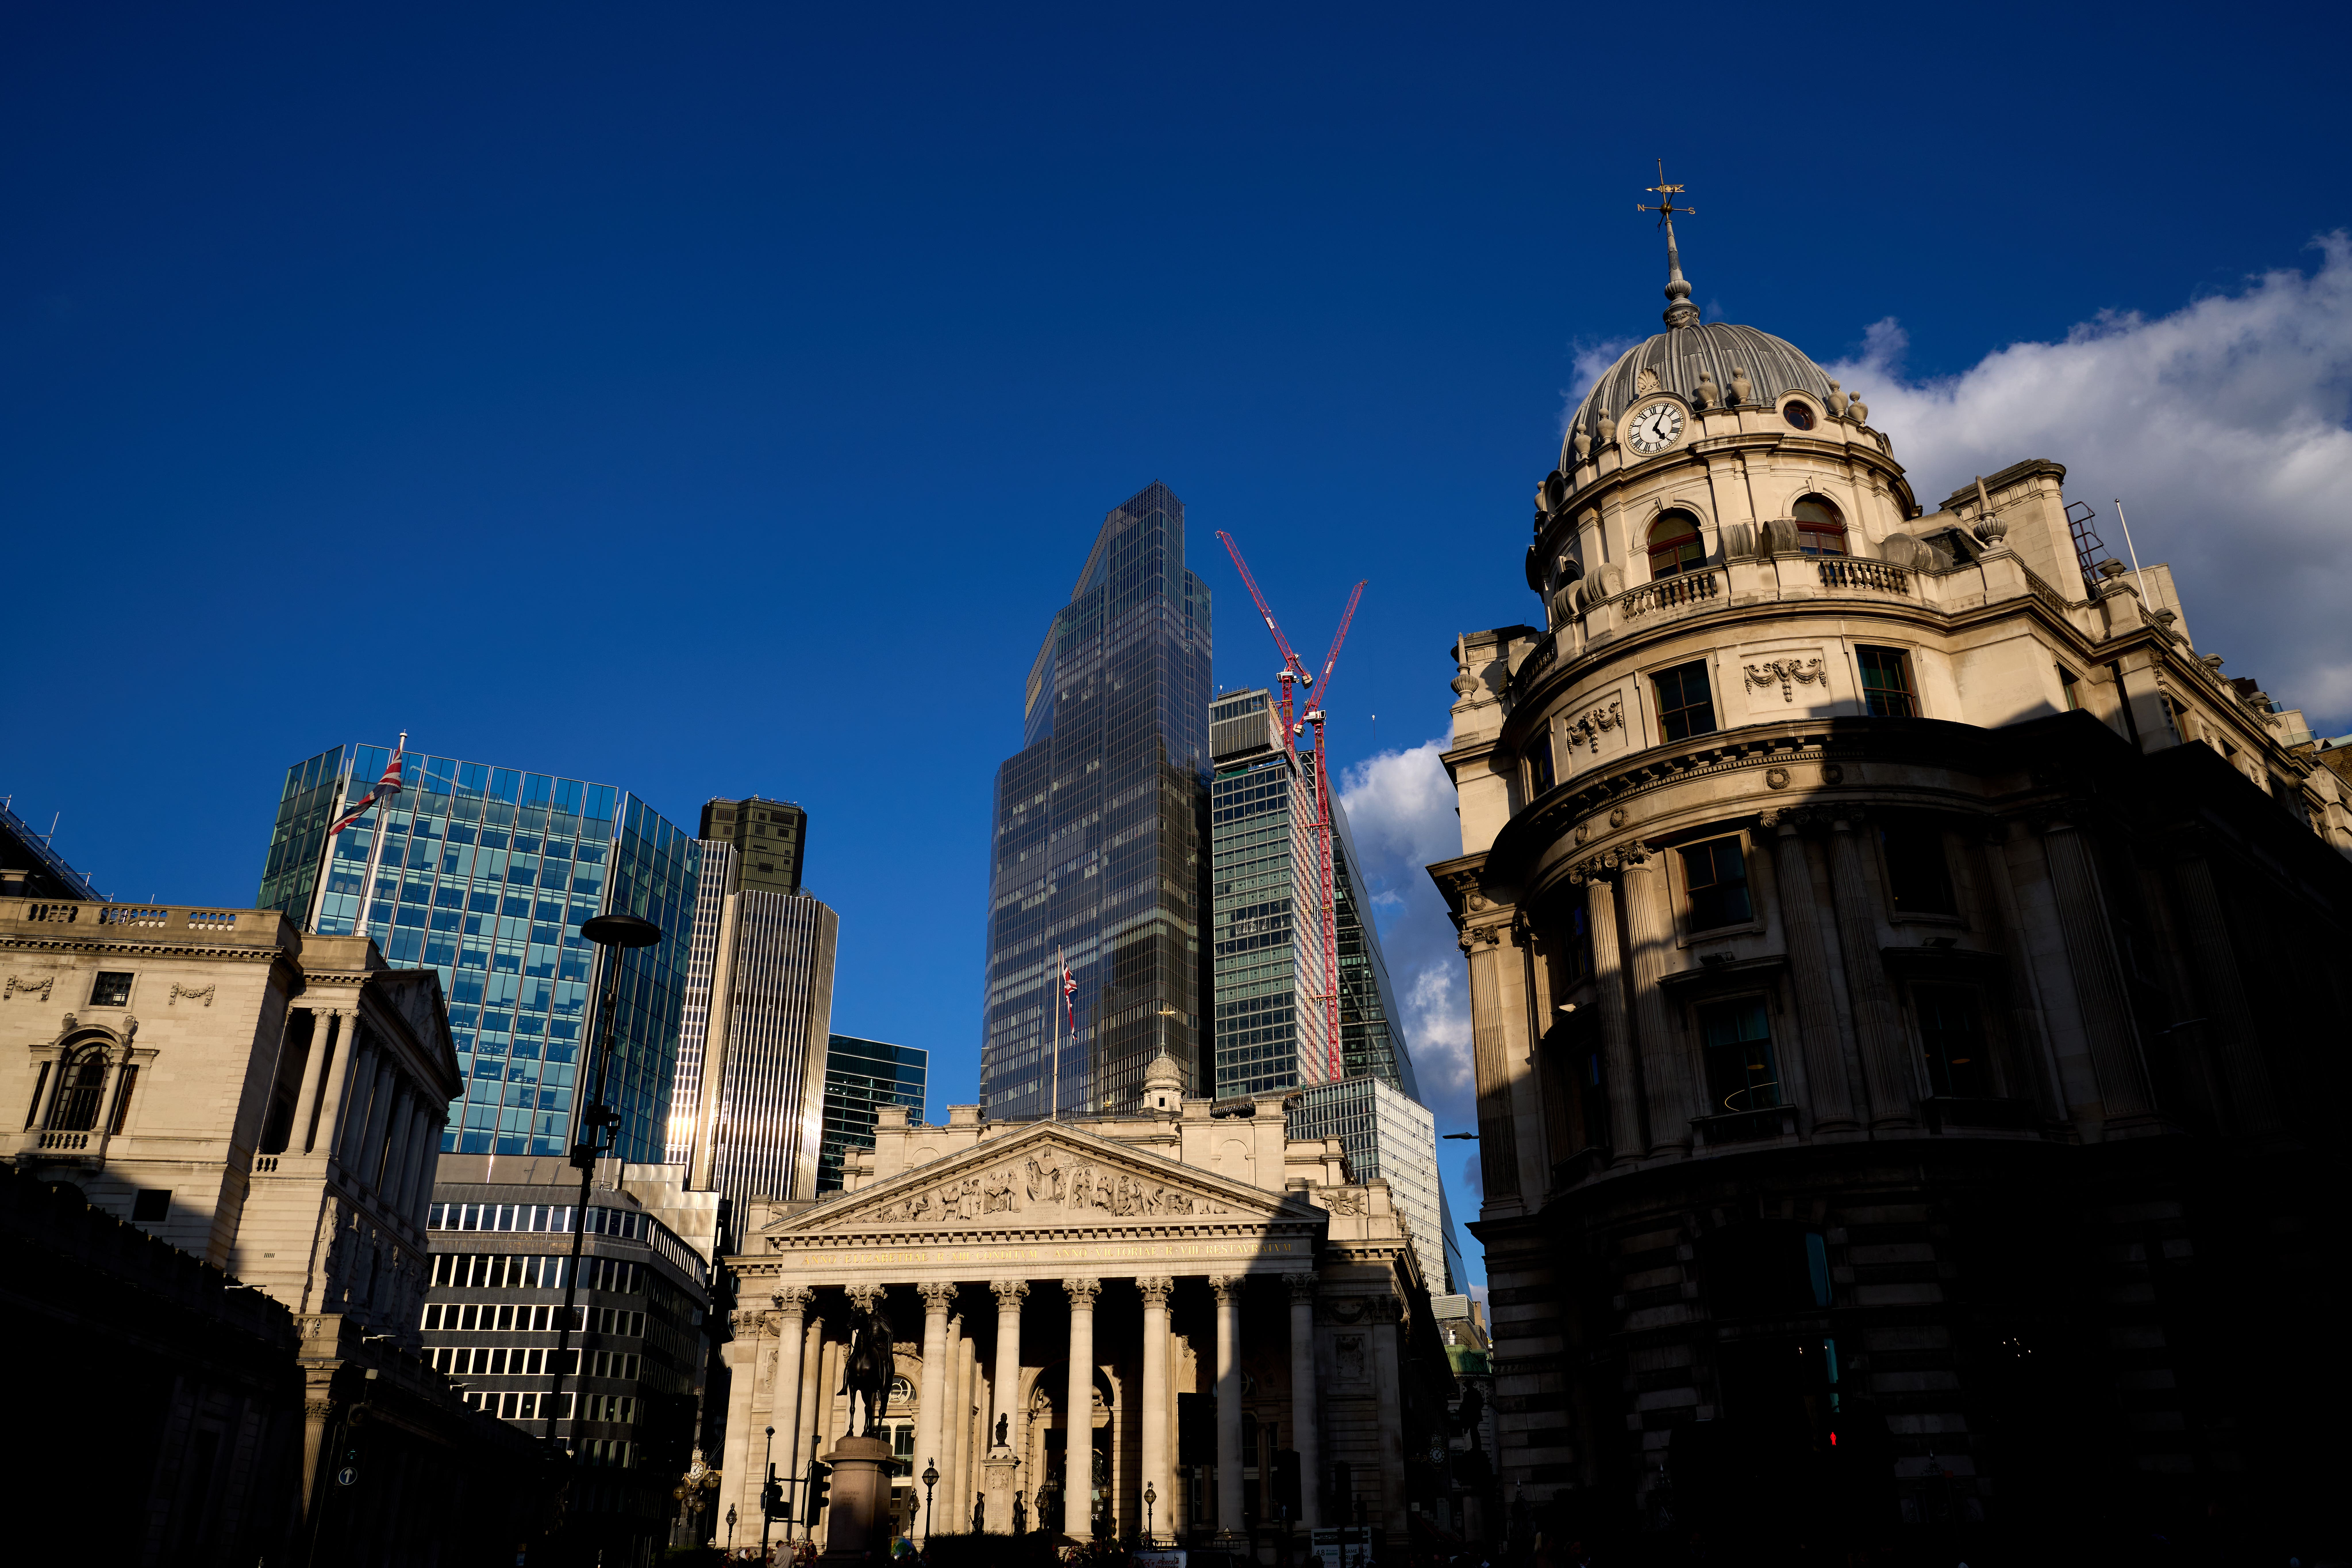 The Bank of Engand is expected to raise interest rates even further next week